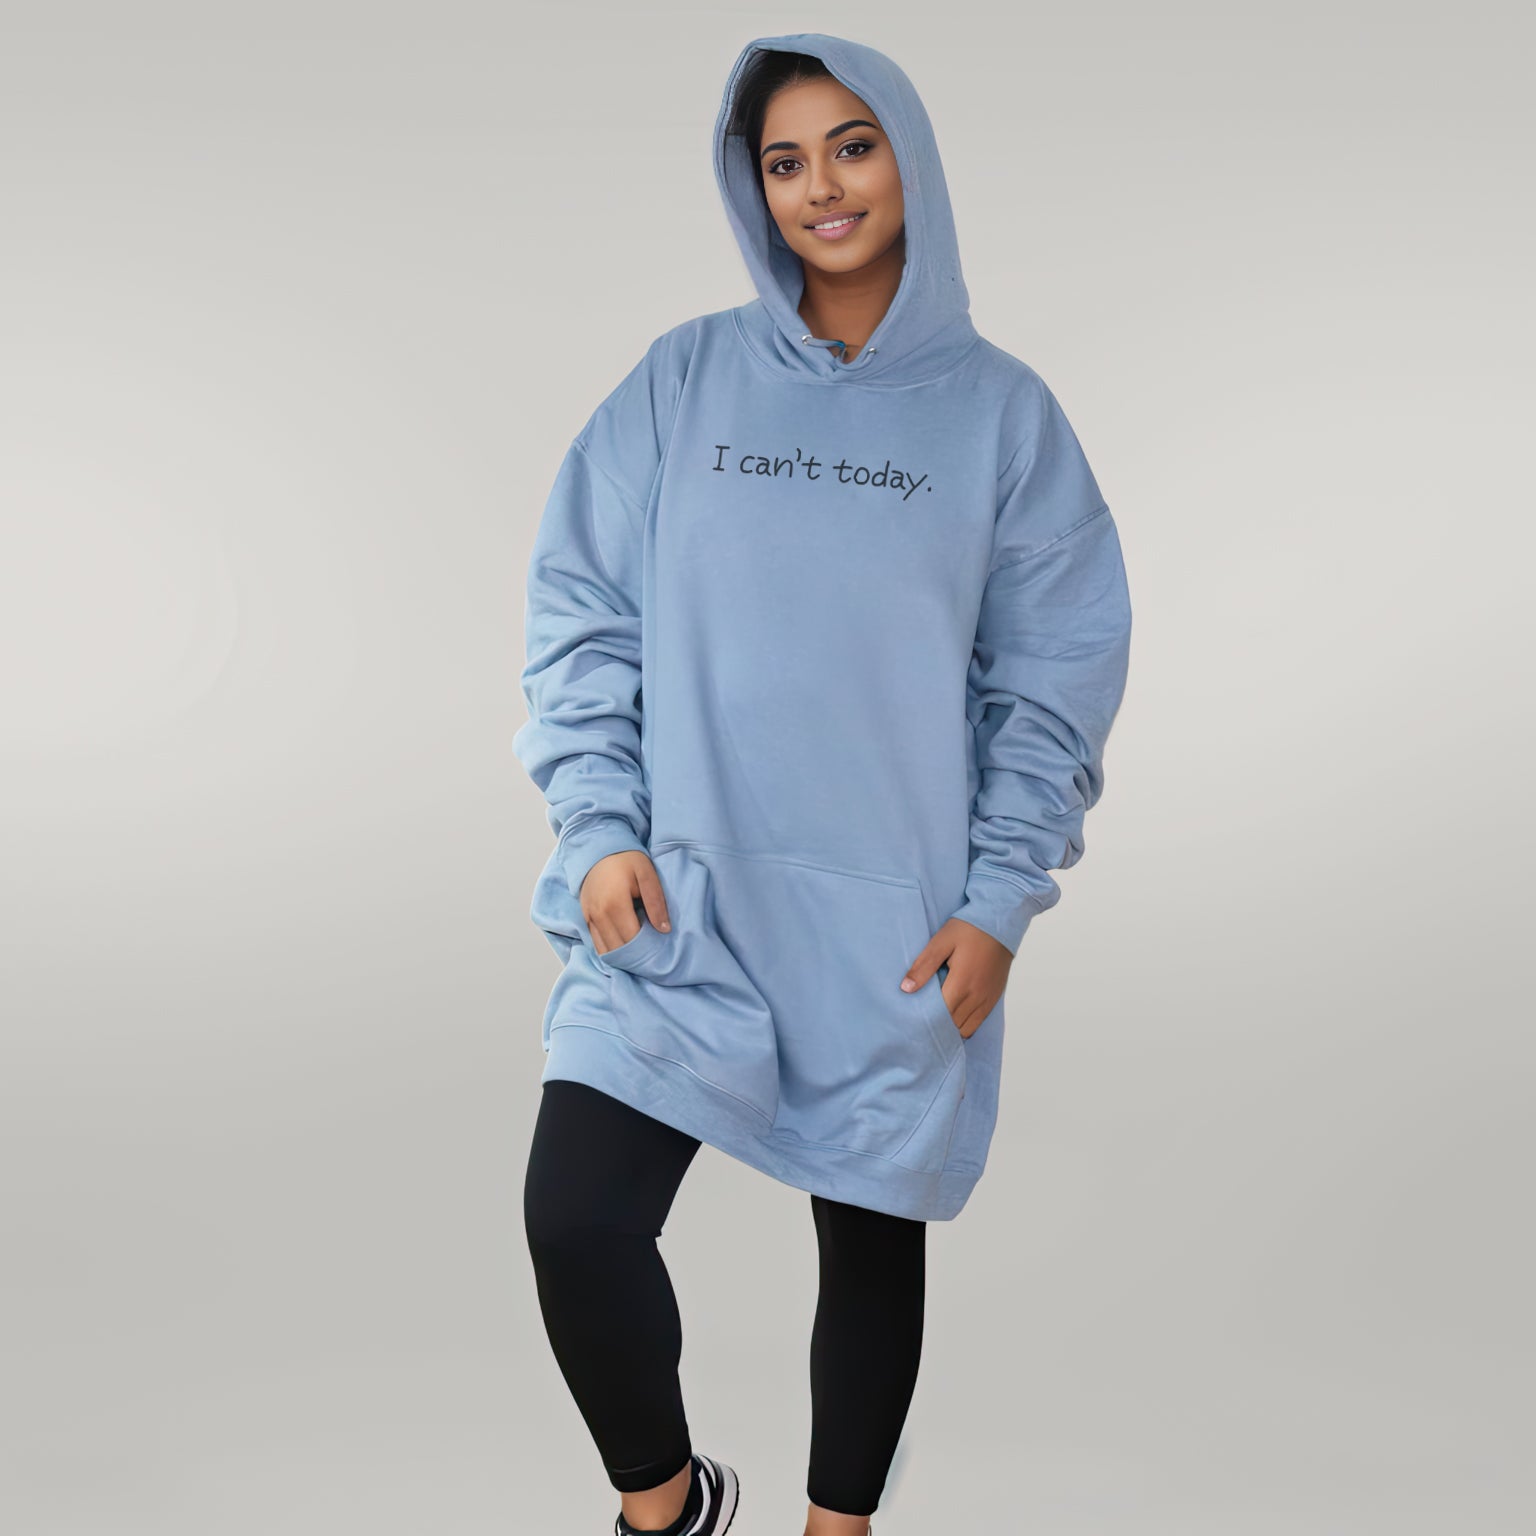 I Can't Today - Huge Oversized Comfy Original Hoody